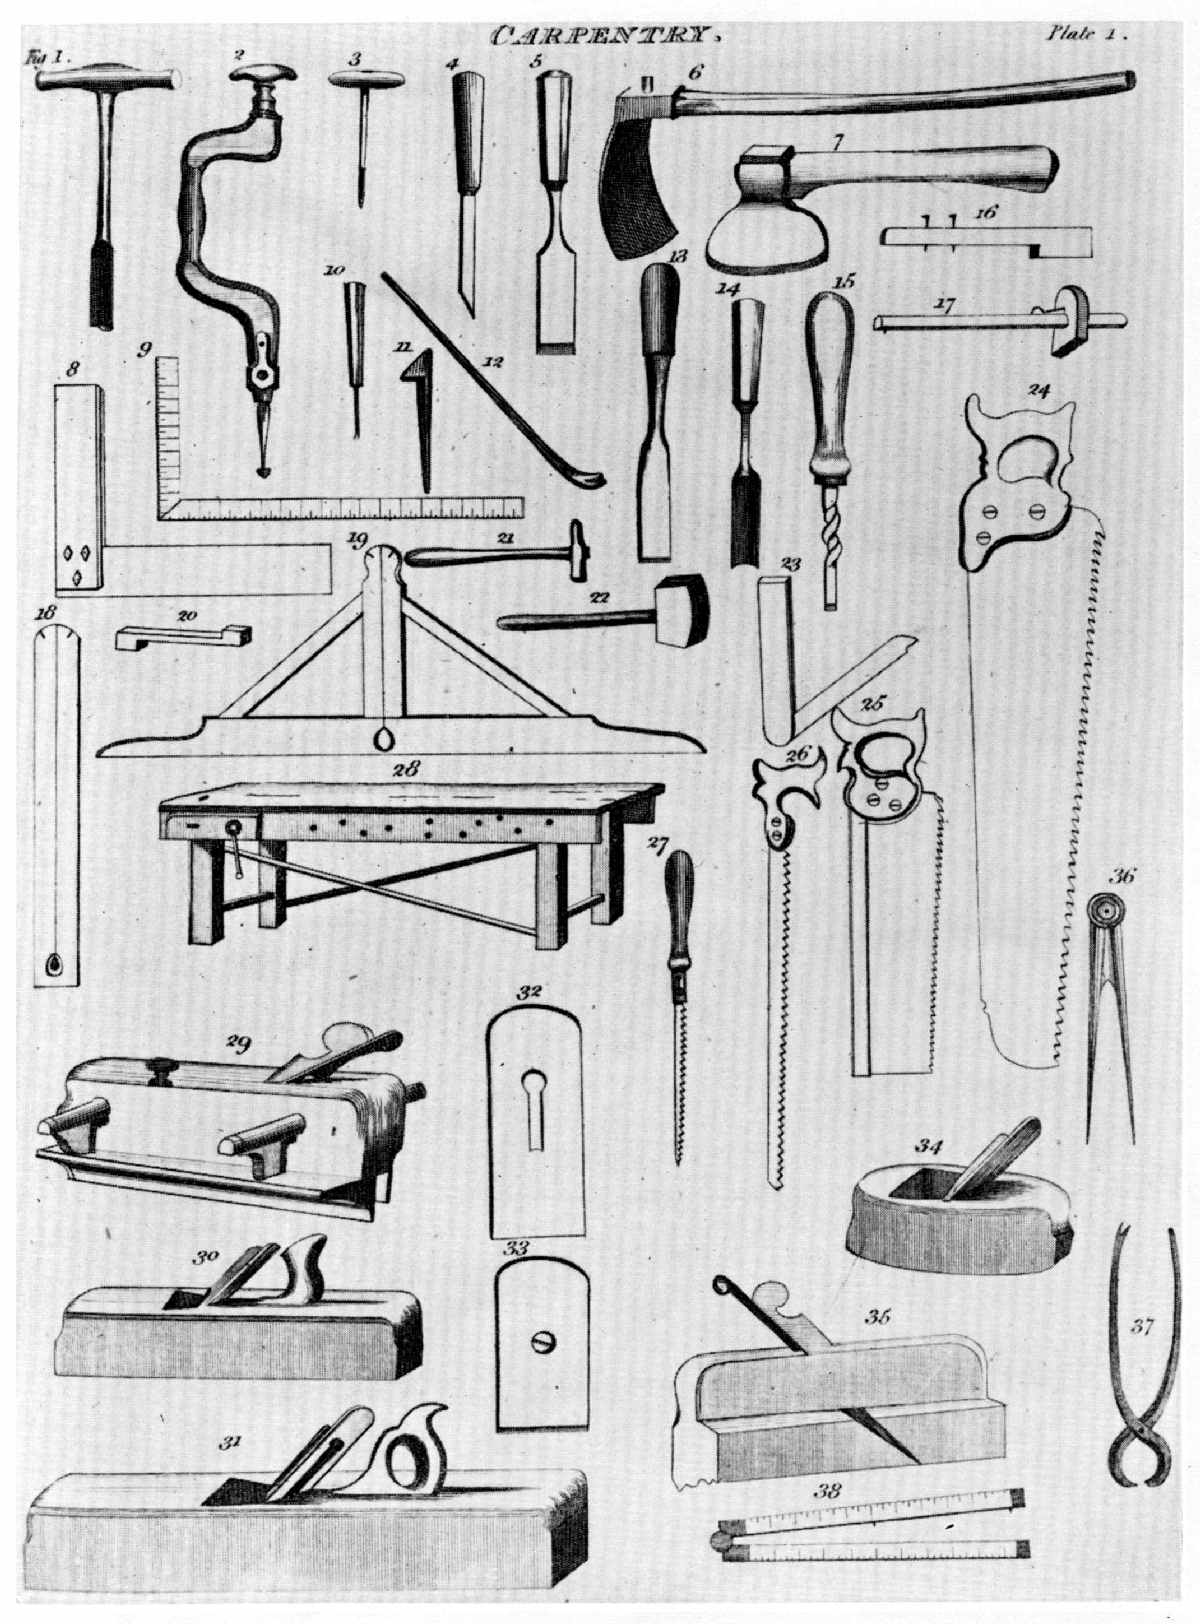 Image of woodworking tools from Ted's Woodworking (Wikimedia Commons)